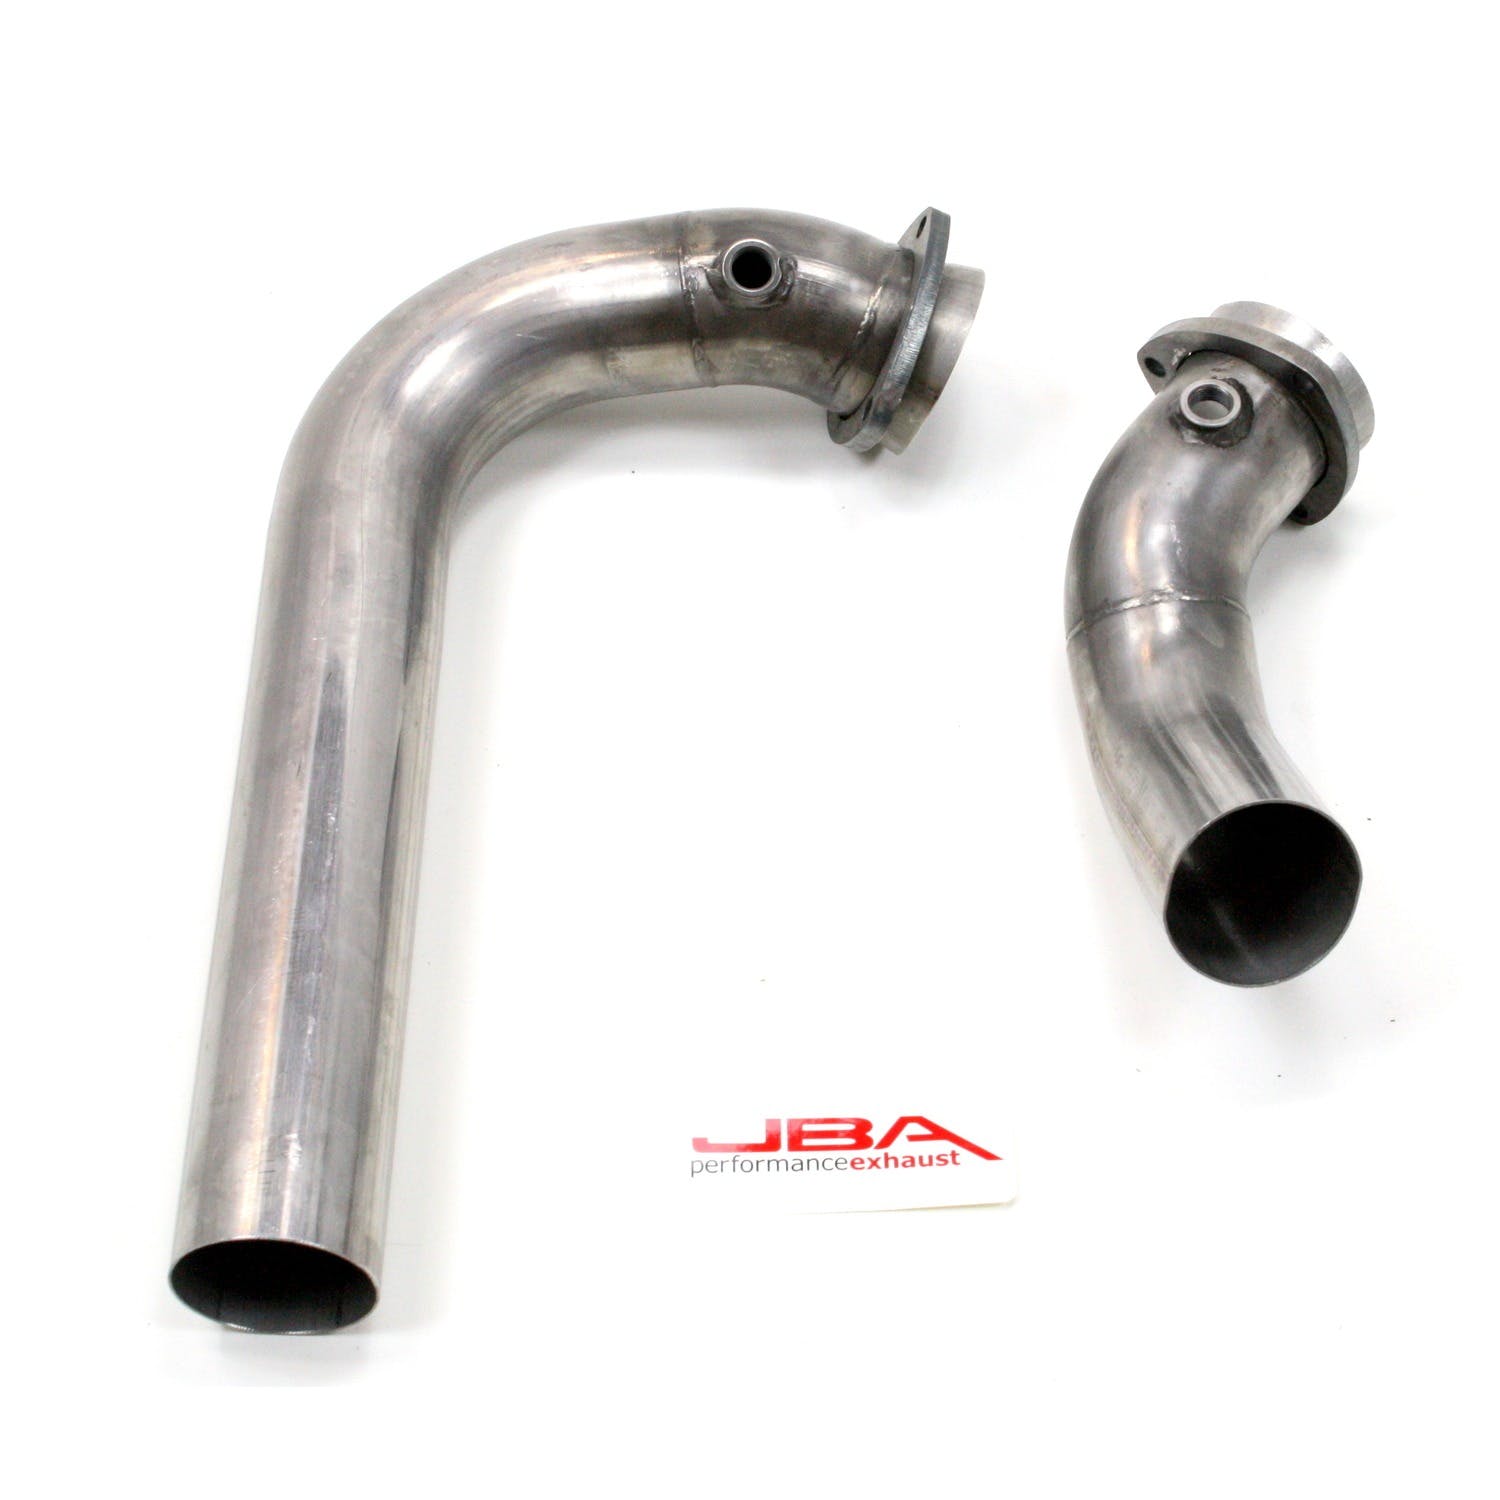 JBA Performance Exhaust 1822SY 1822SY 3 inch Stainless Steel Mid-Pipe Down Pipe for 1822, 1